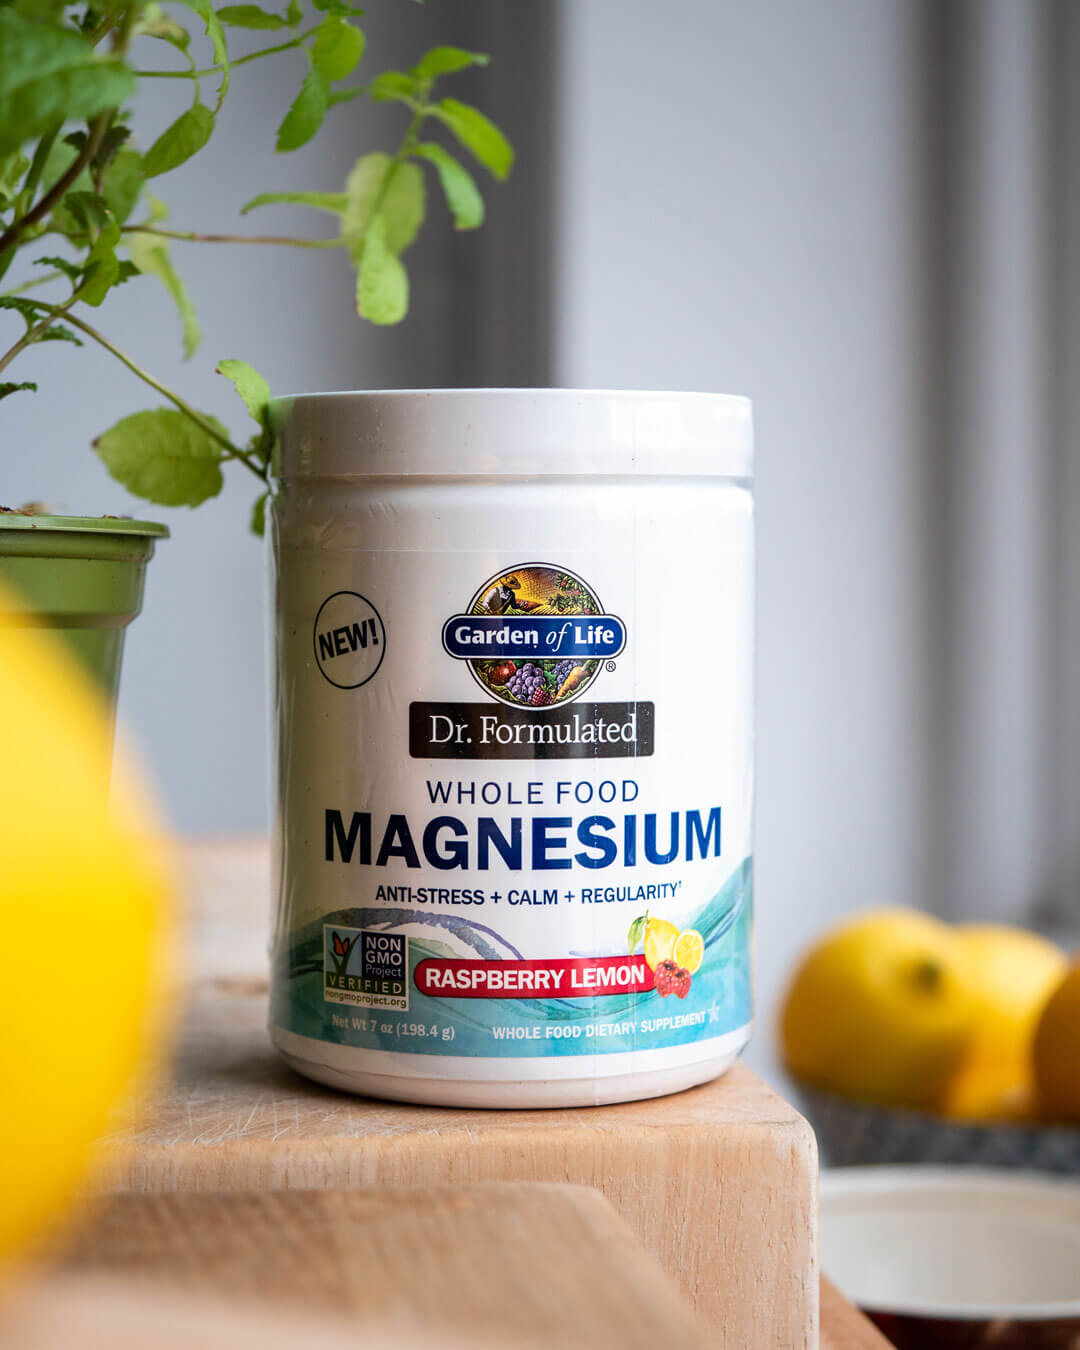 Product Photography of Garden of Life's Magnesium supplements.jpg